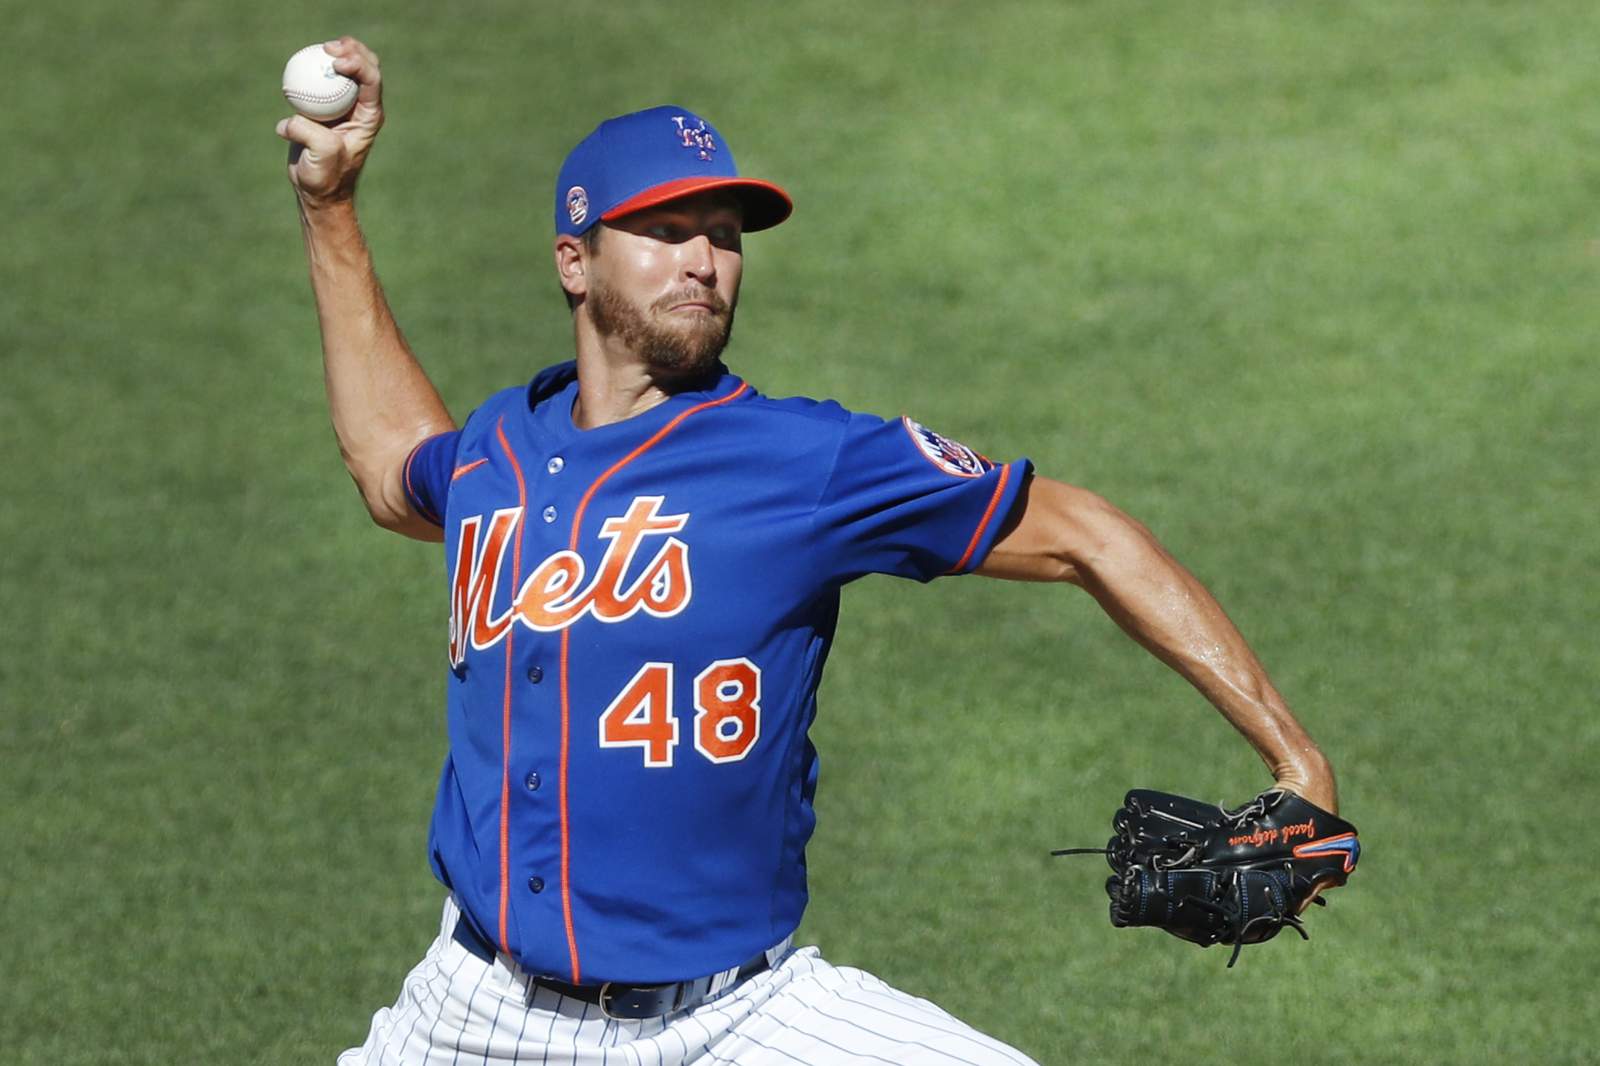 Mets ace deGrom still targeting opening day, but team unsure